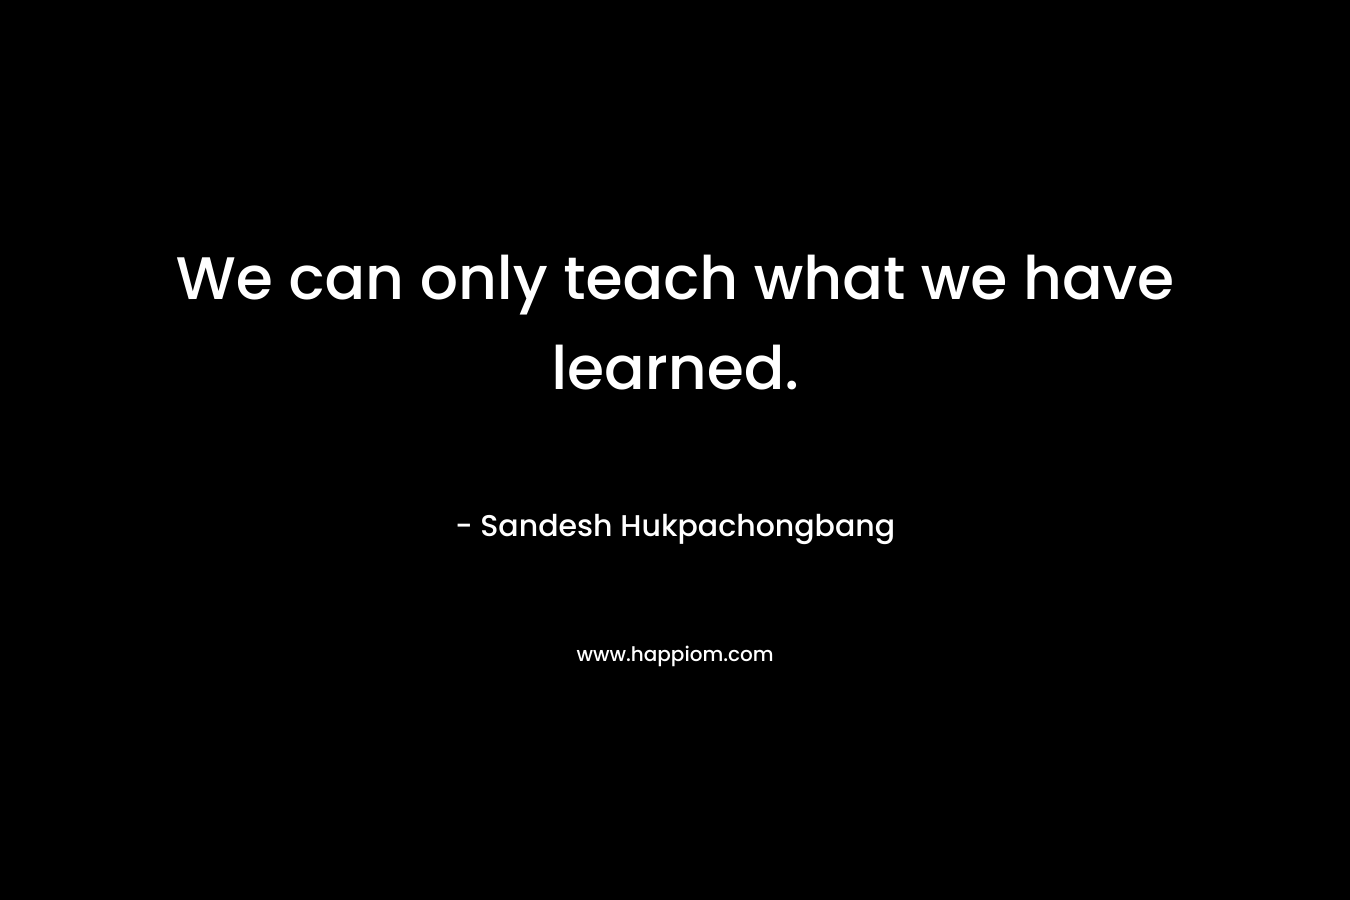 We can only teach what we have learned.